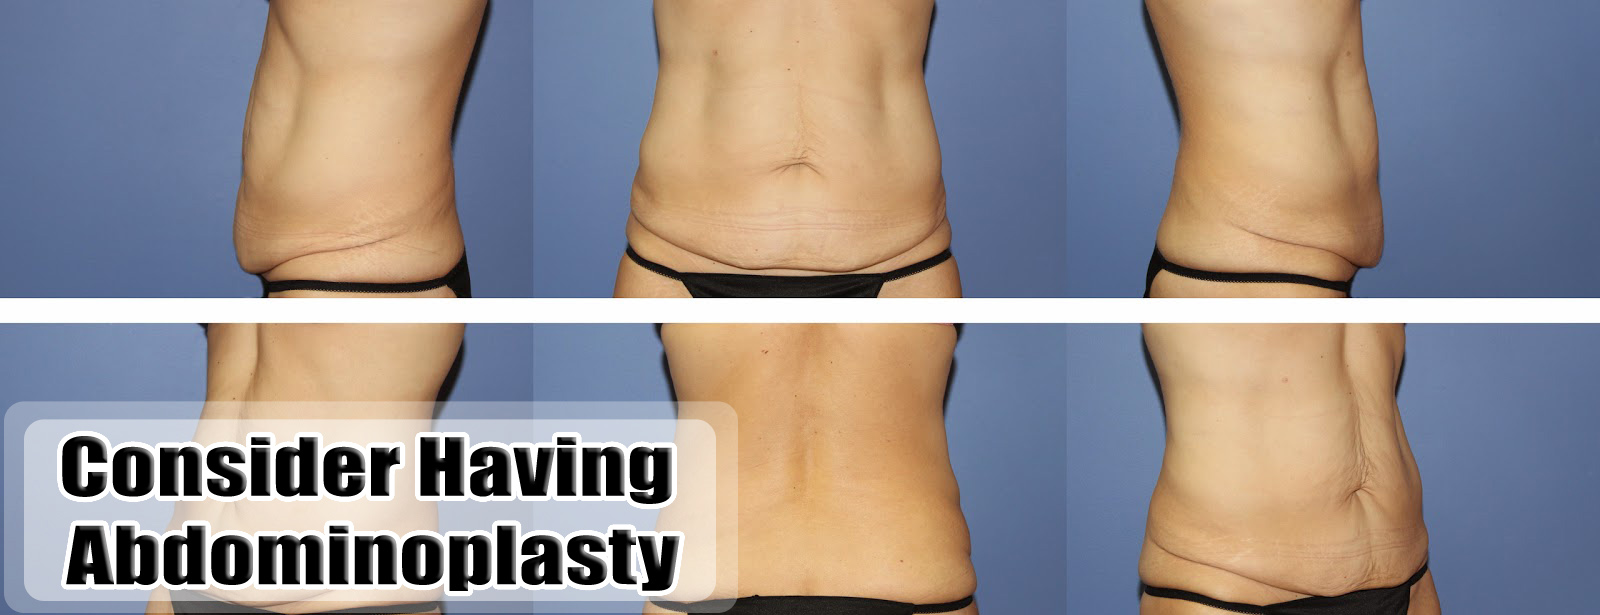 Why You Need to Consider Having Abdominoplasty